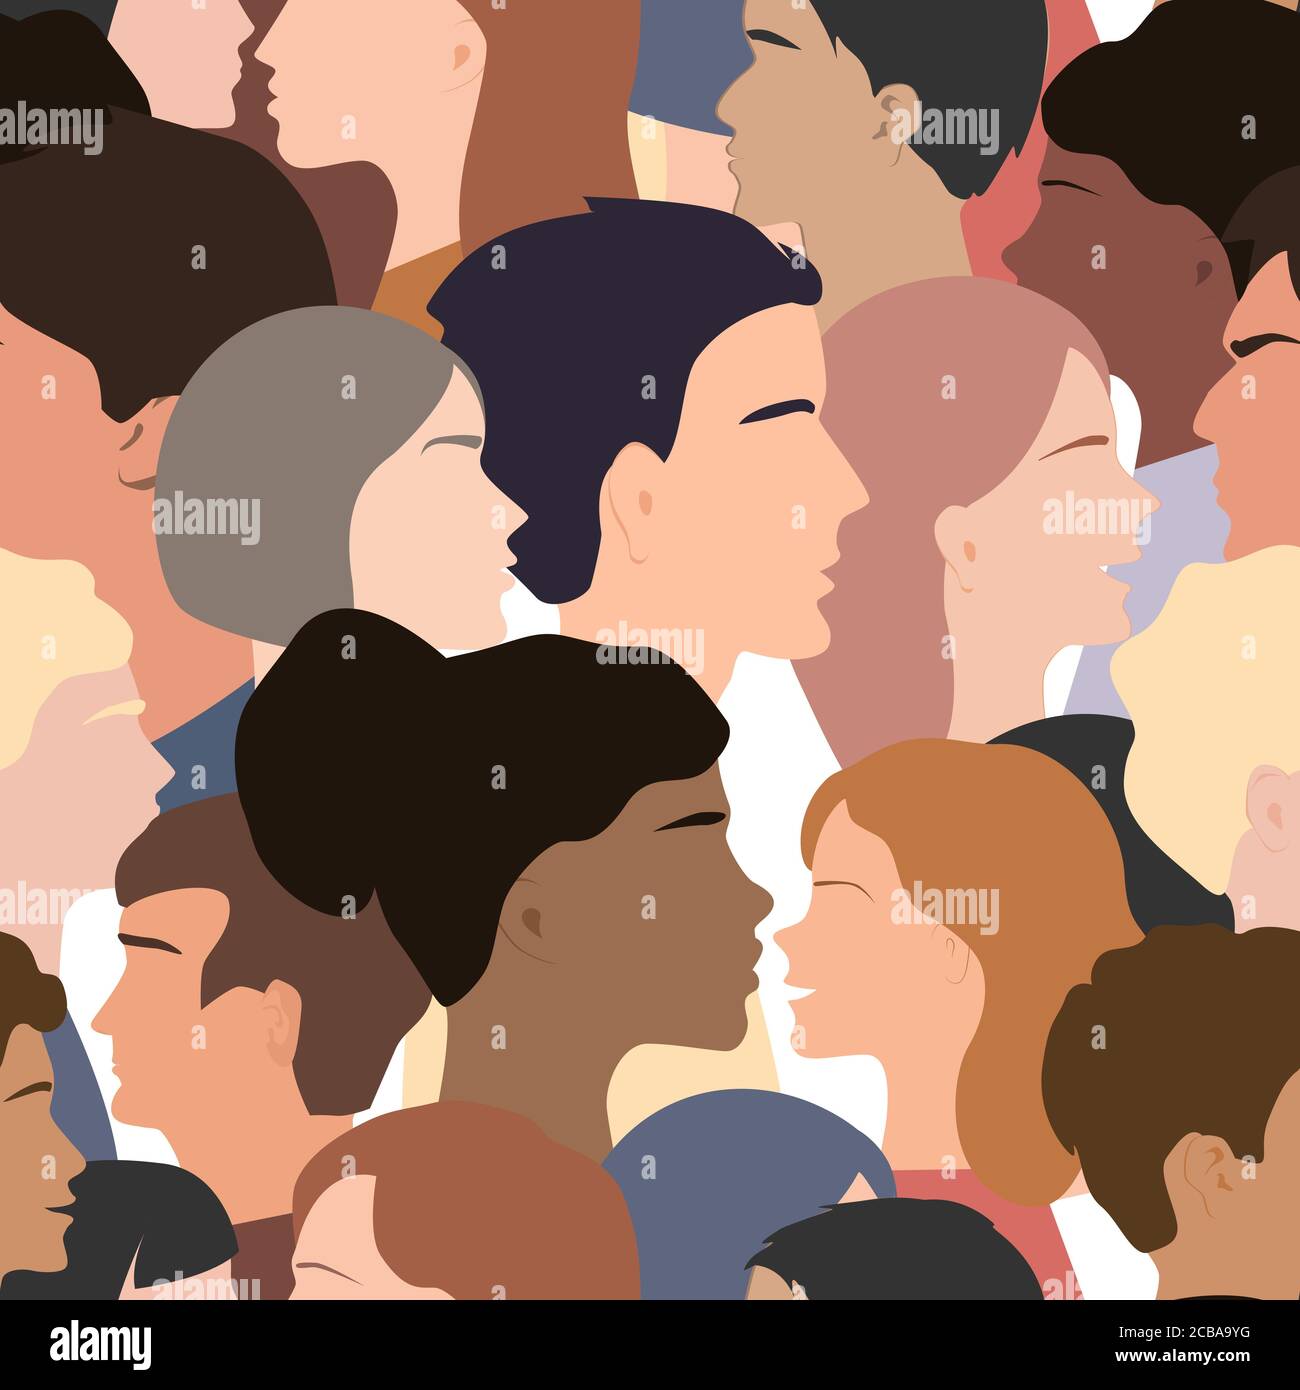 Seamless pattern of different people profile heads. Humans of different gender, ethnicity, and color. Vector background Stock Vector